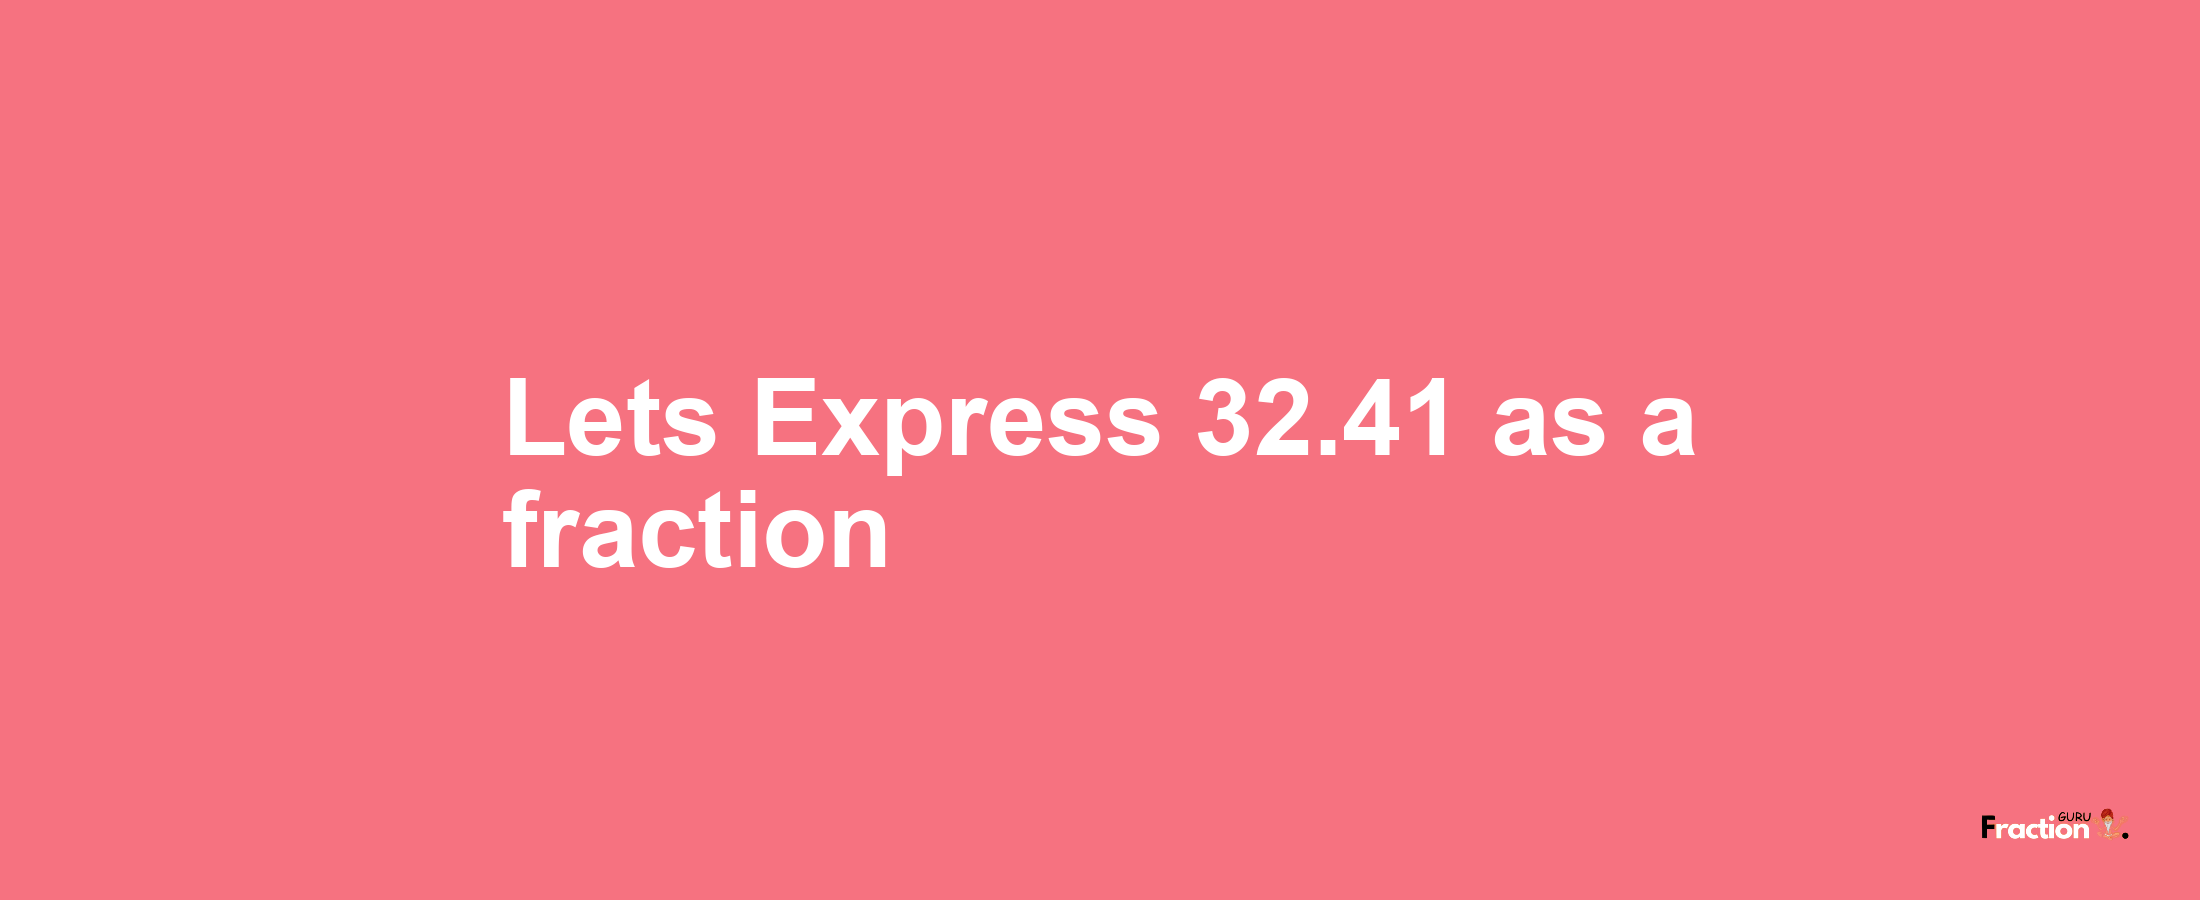 Lets Express 32.41 as afraction